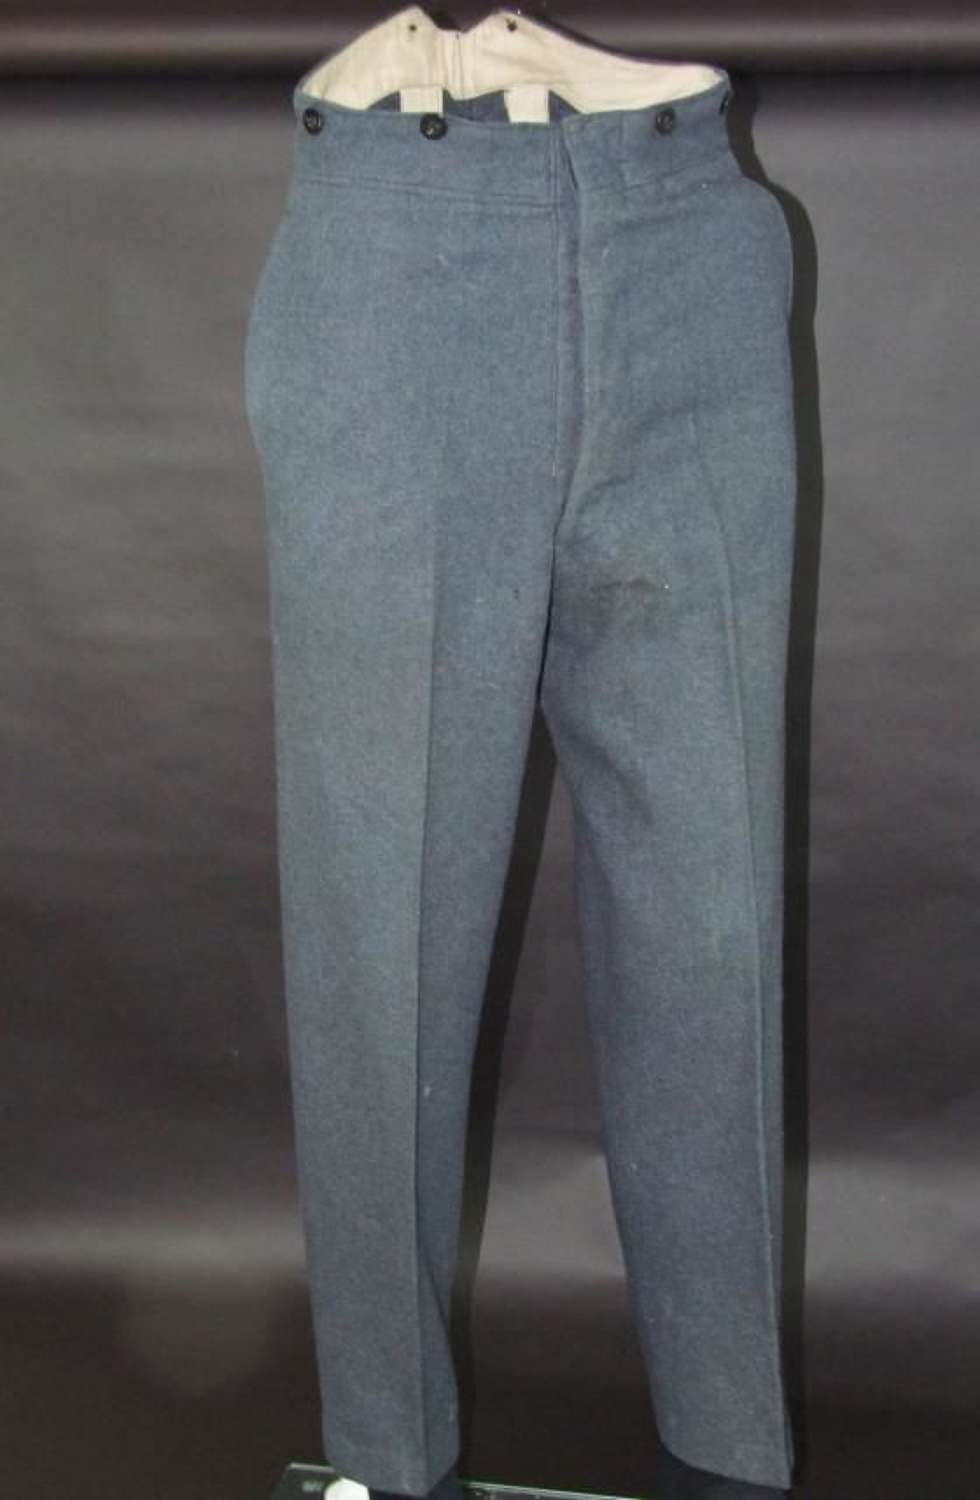 RAF Other Ranks Service Dress Trousers